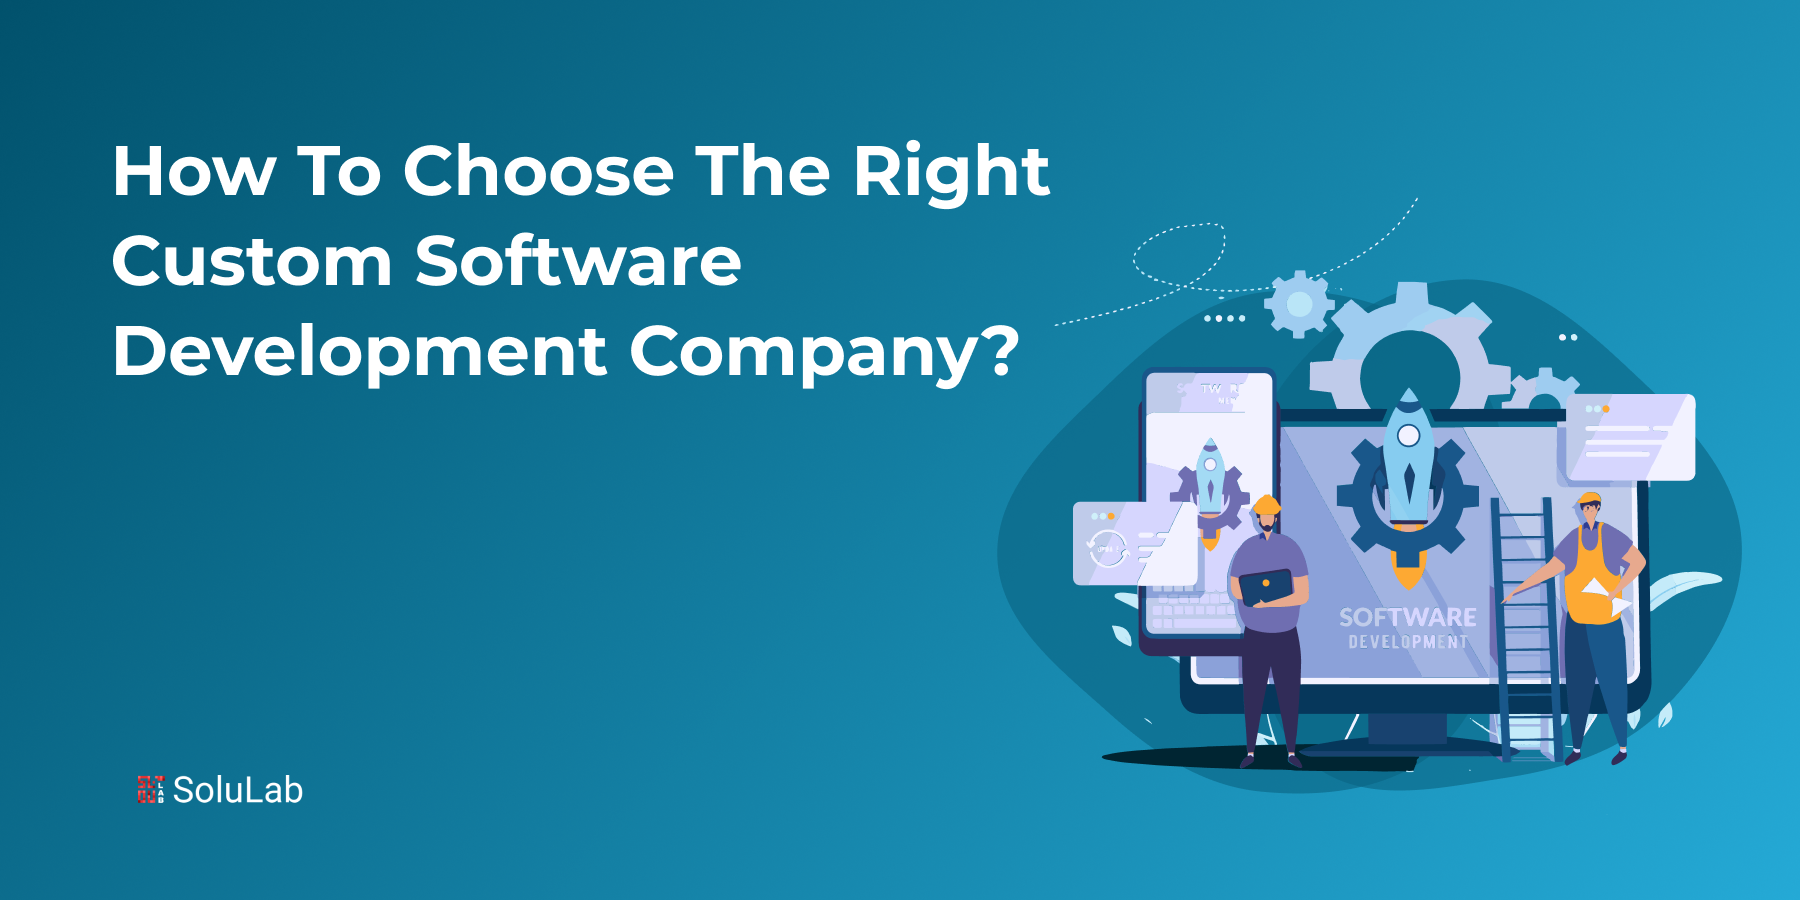 How to Choose The Right Custom Software Development Company?